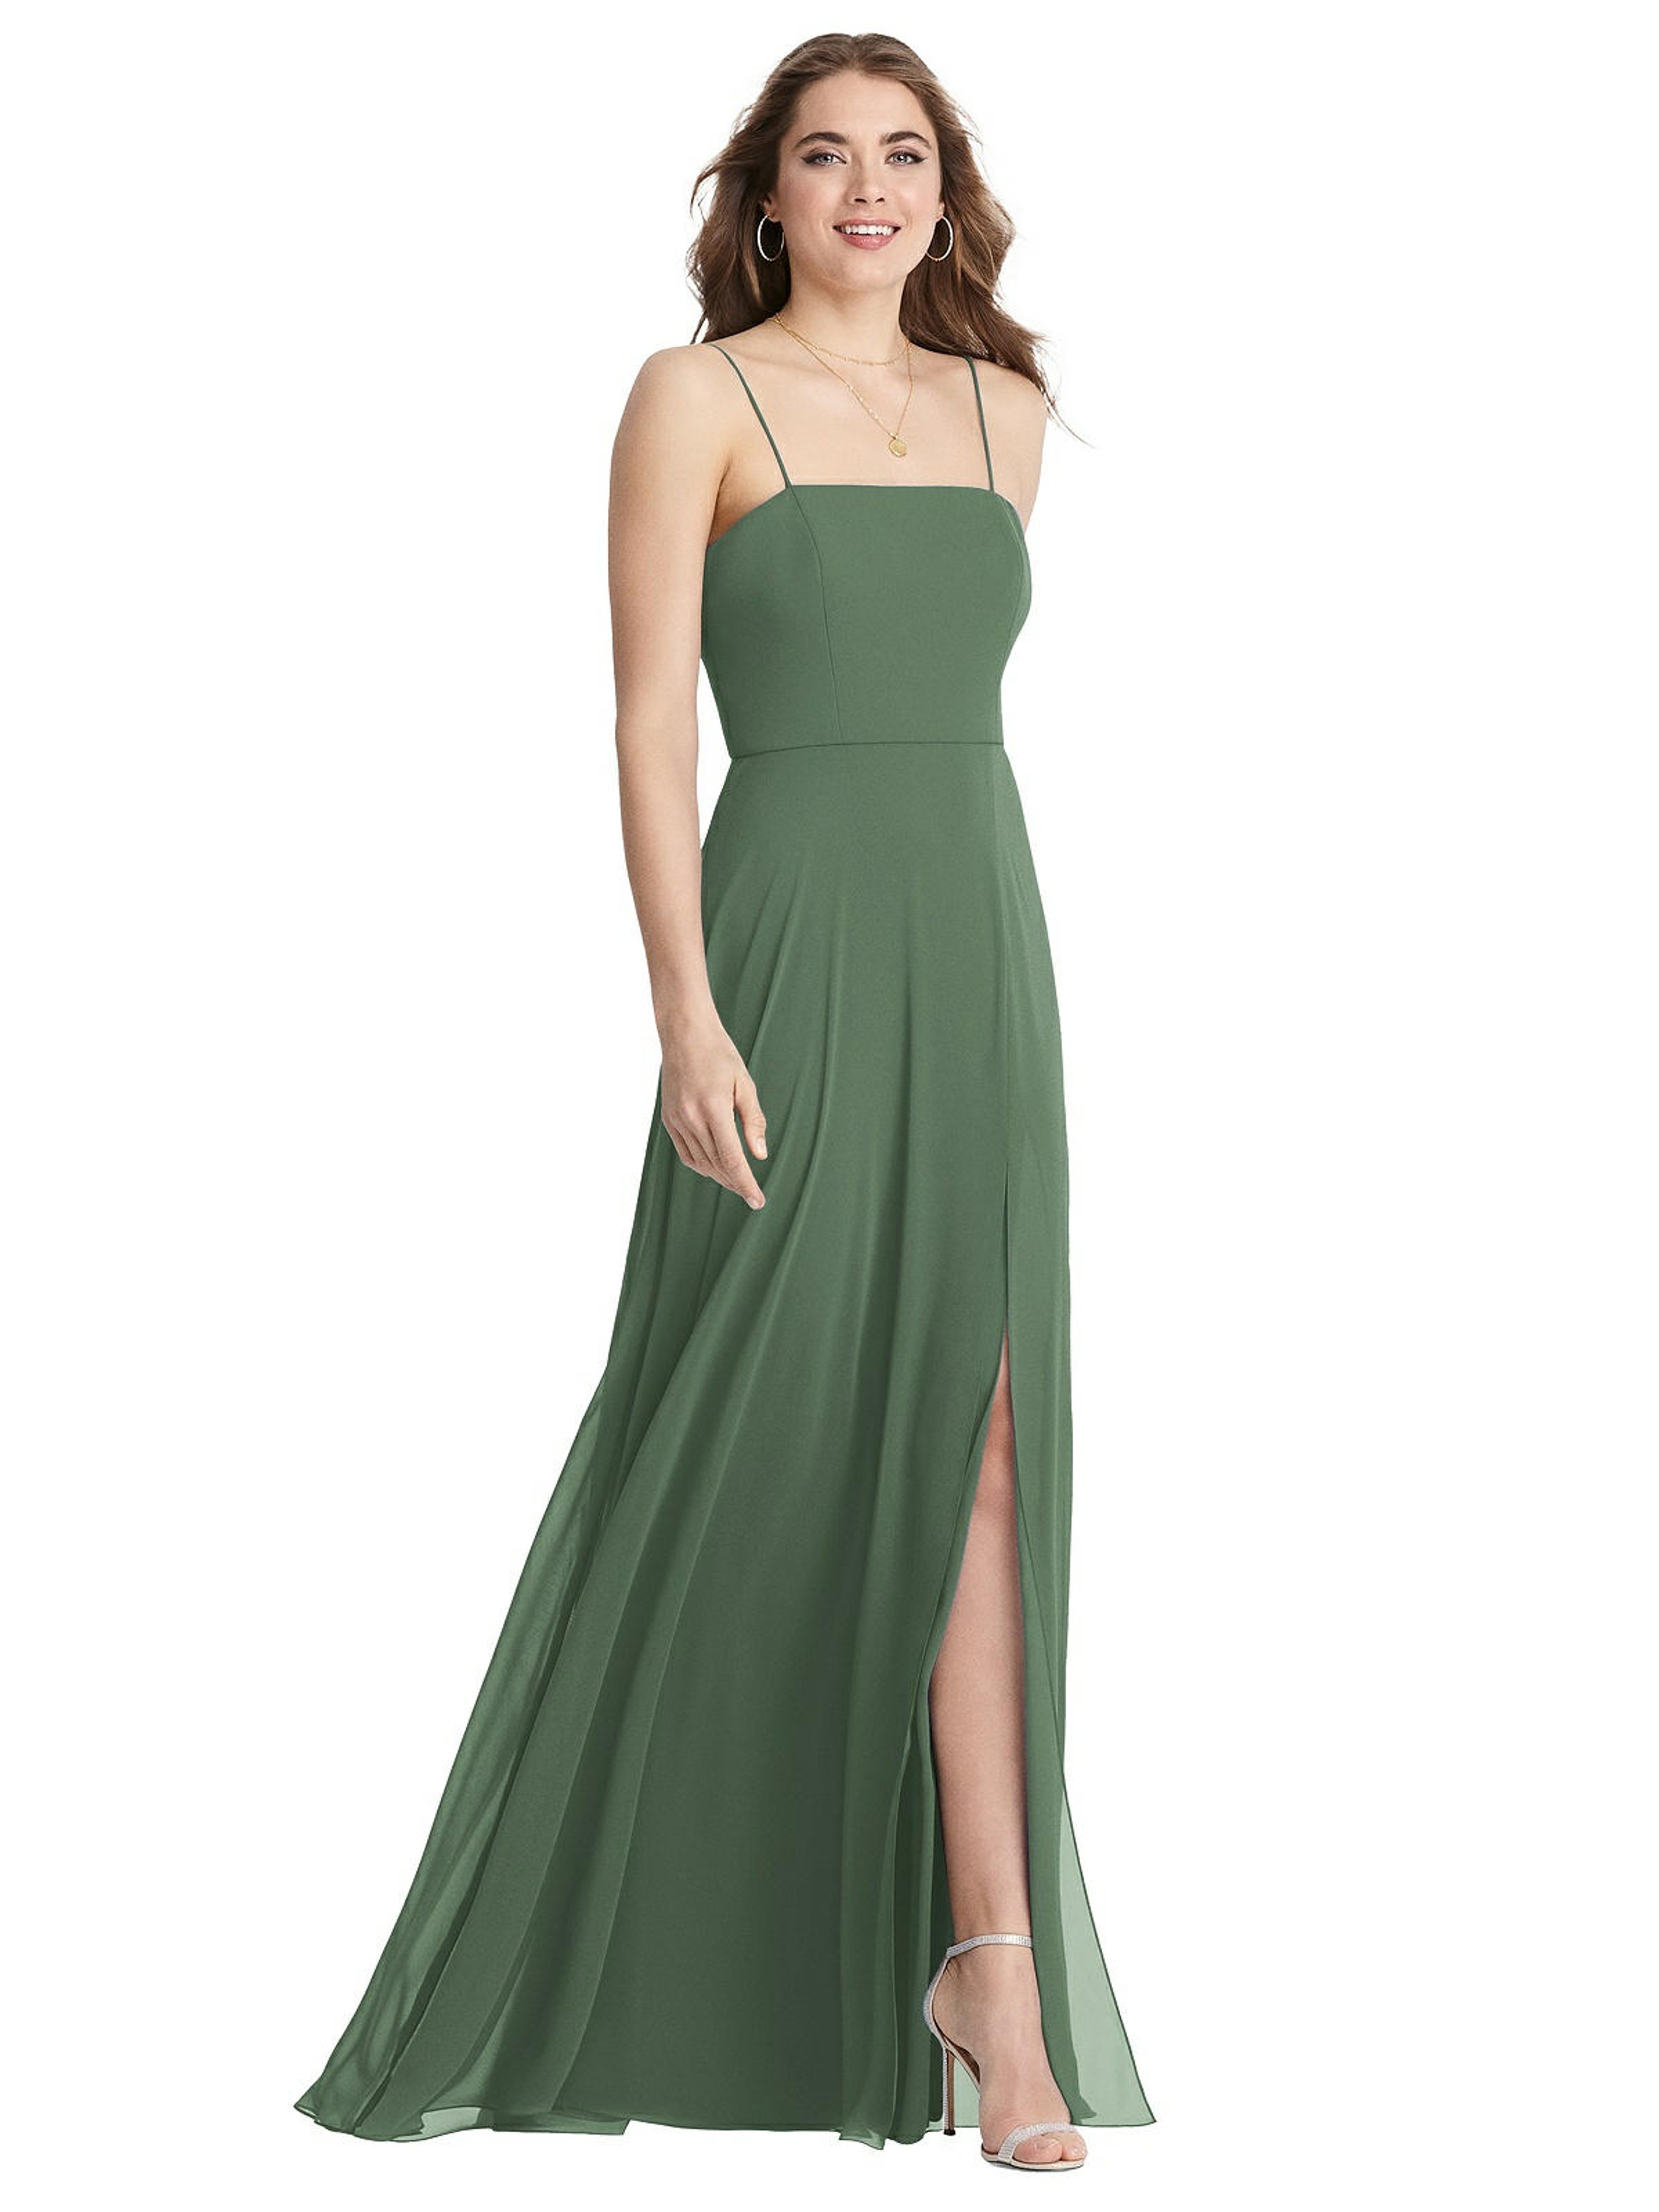 LOVELY LOVELY SQUARE NECK CHIFFON MAXI DRESS WITH FRONT SLIT